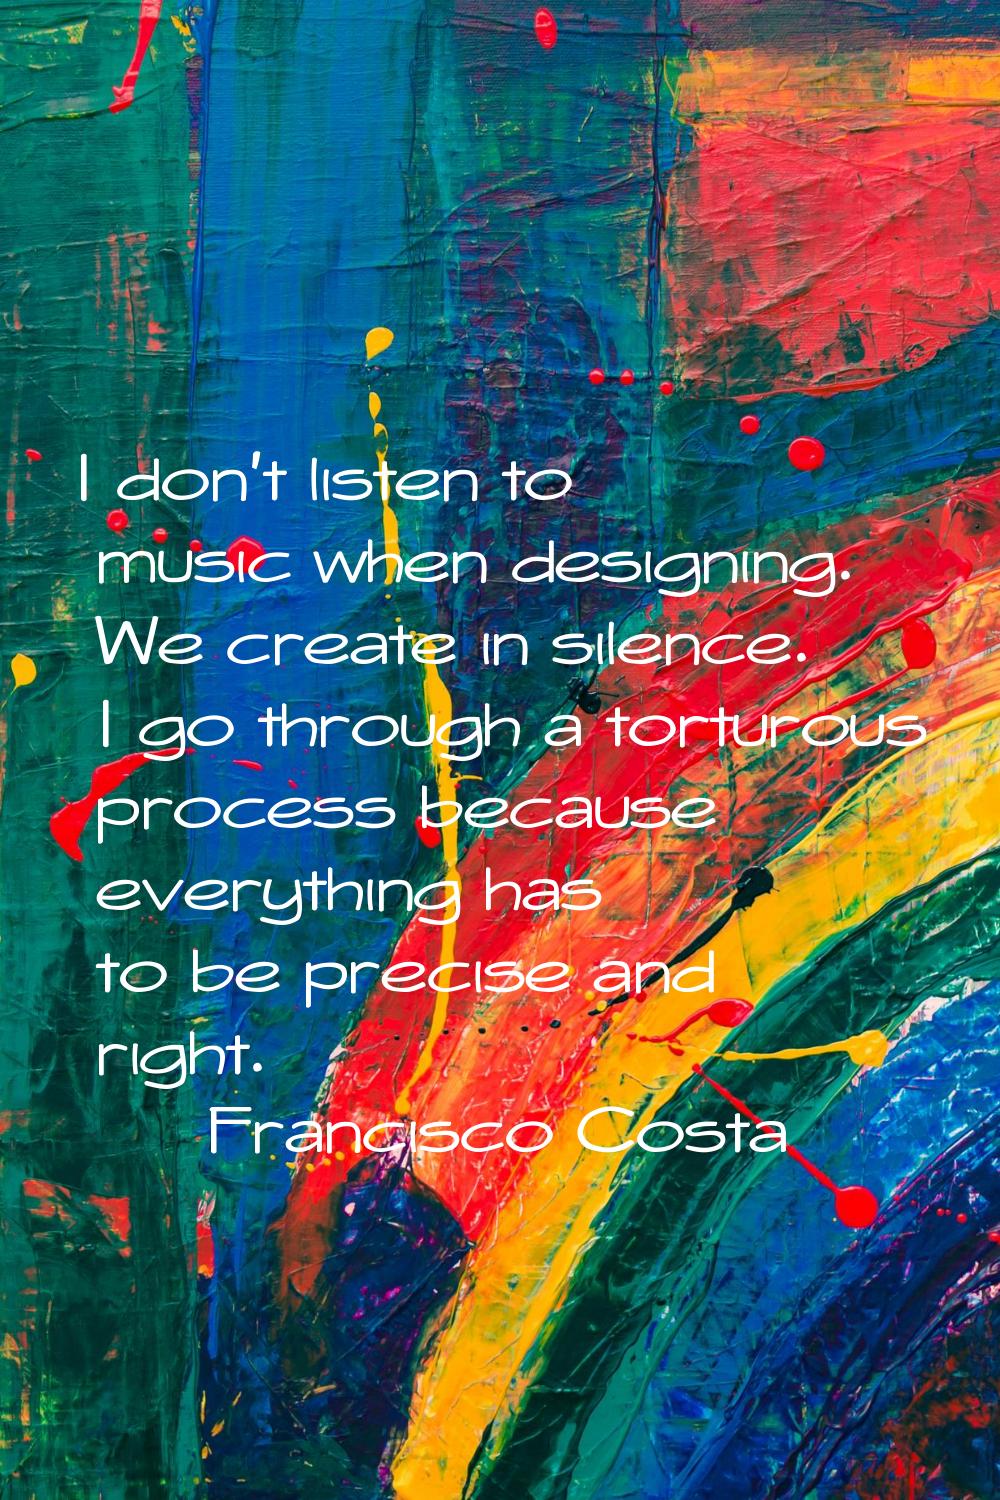 I don't listen to music when designing. We create in silence. I go through a torturous process beca